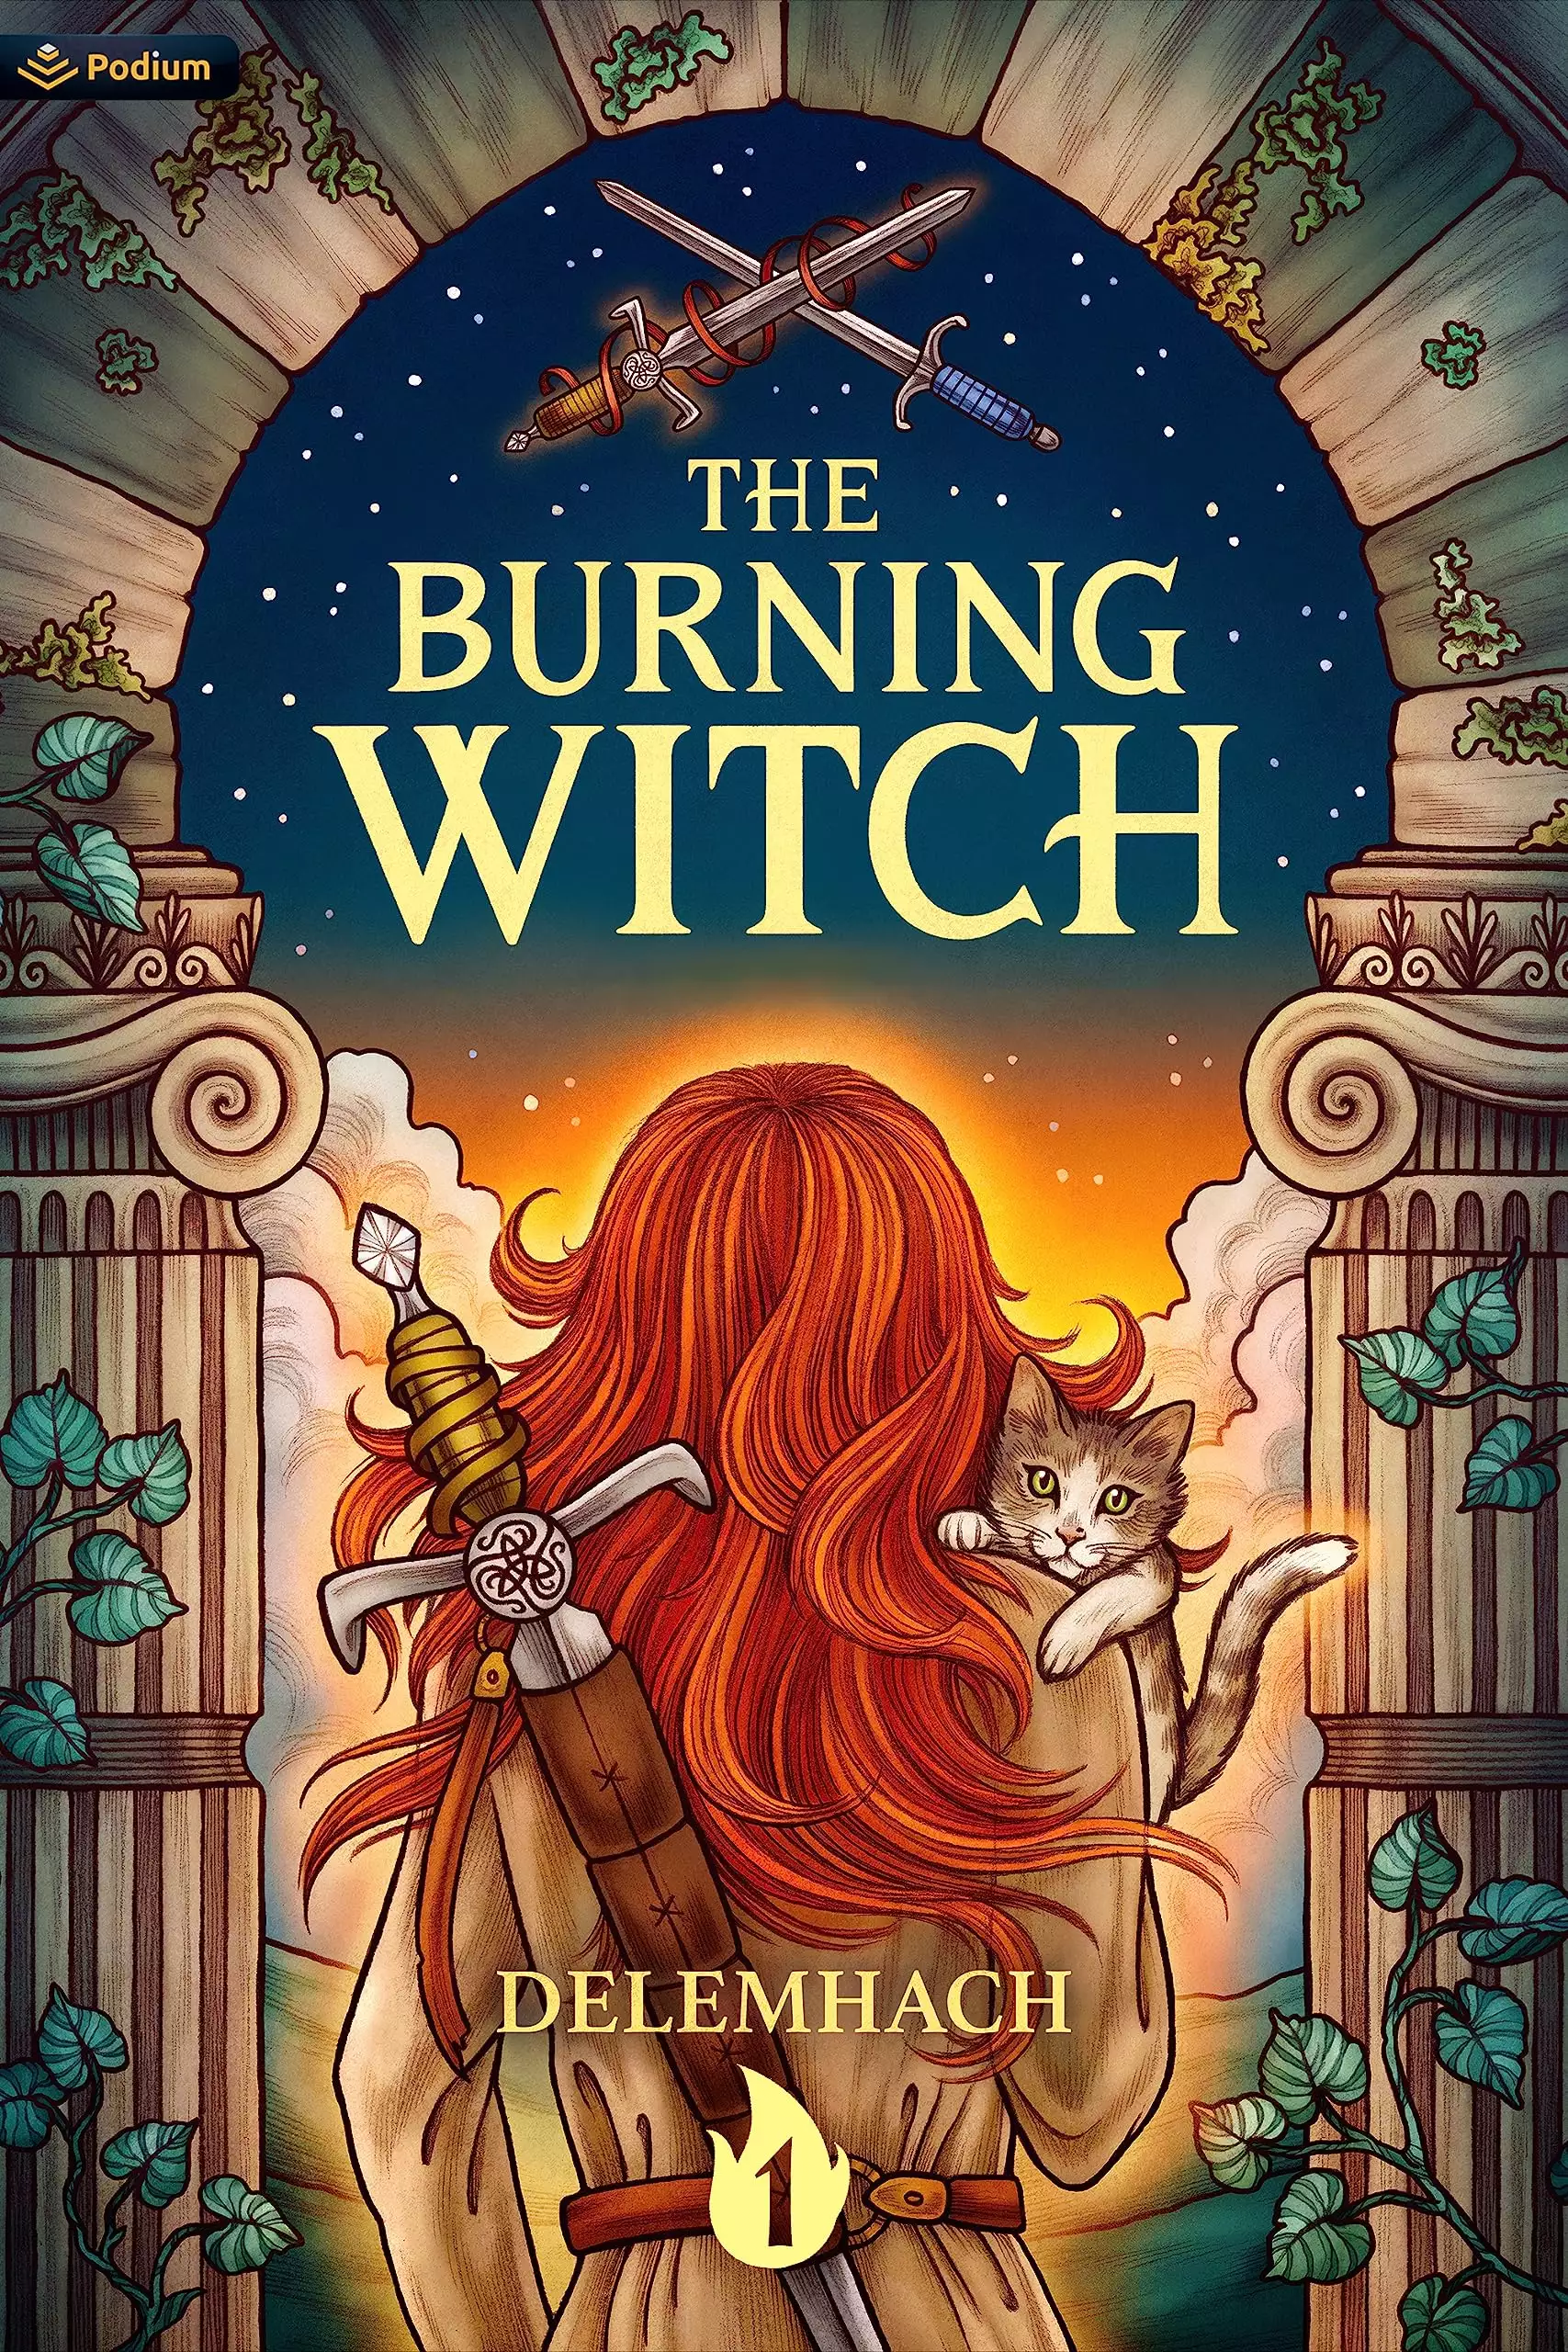 The Burning Witch: A Humorous Romantic Fantasy